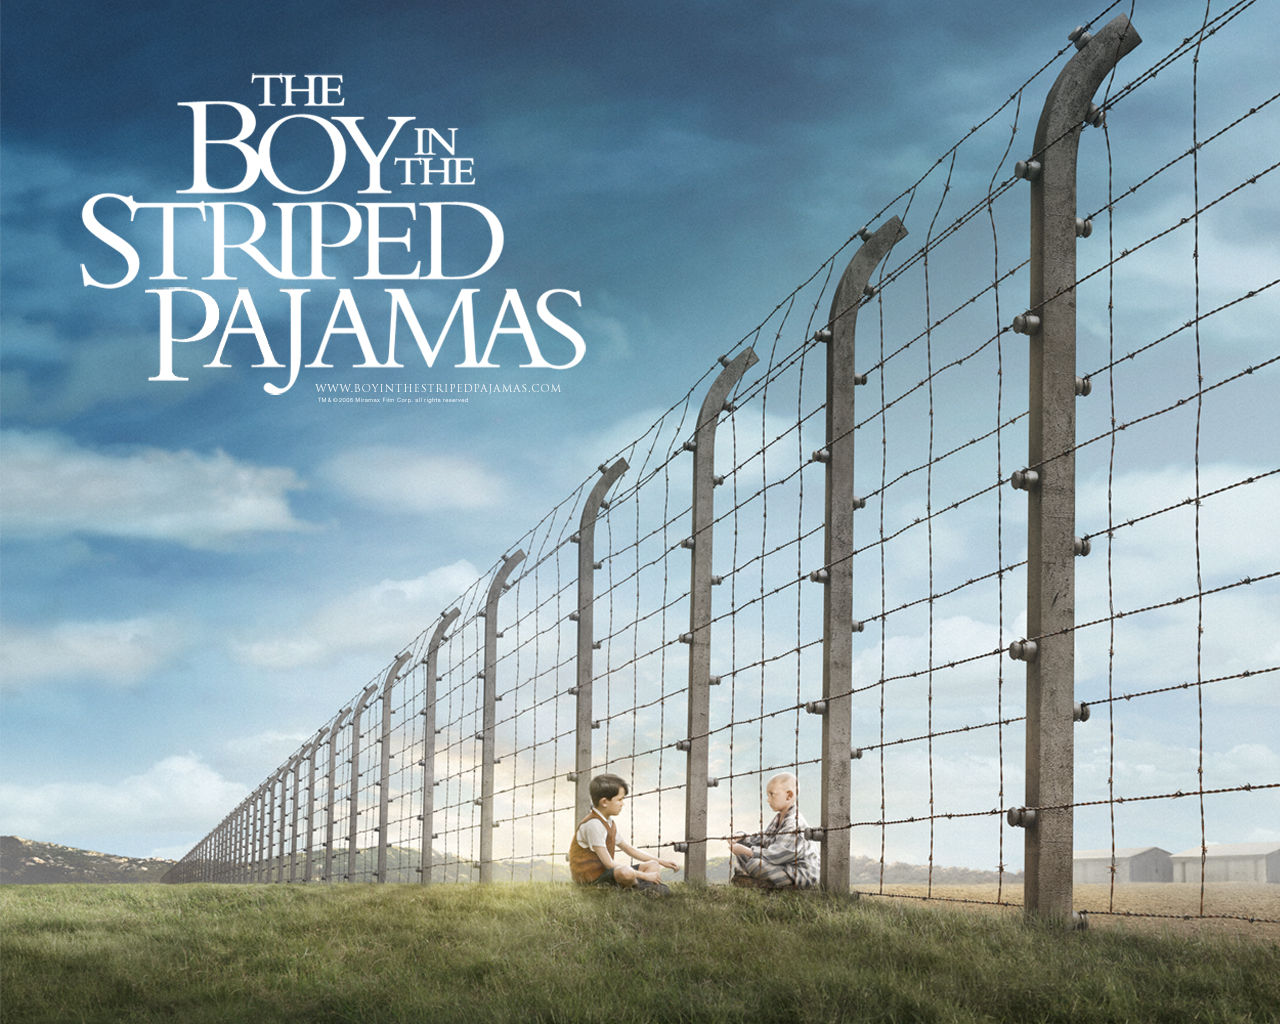 the-boy-in-the-striped-pajamas-image.jpg